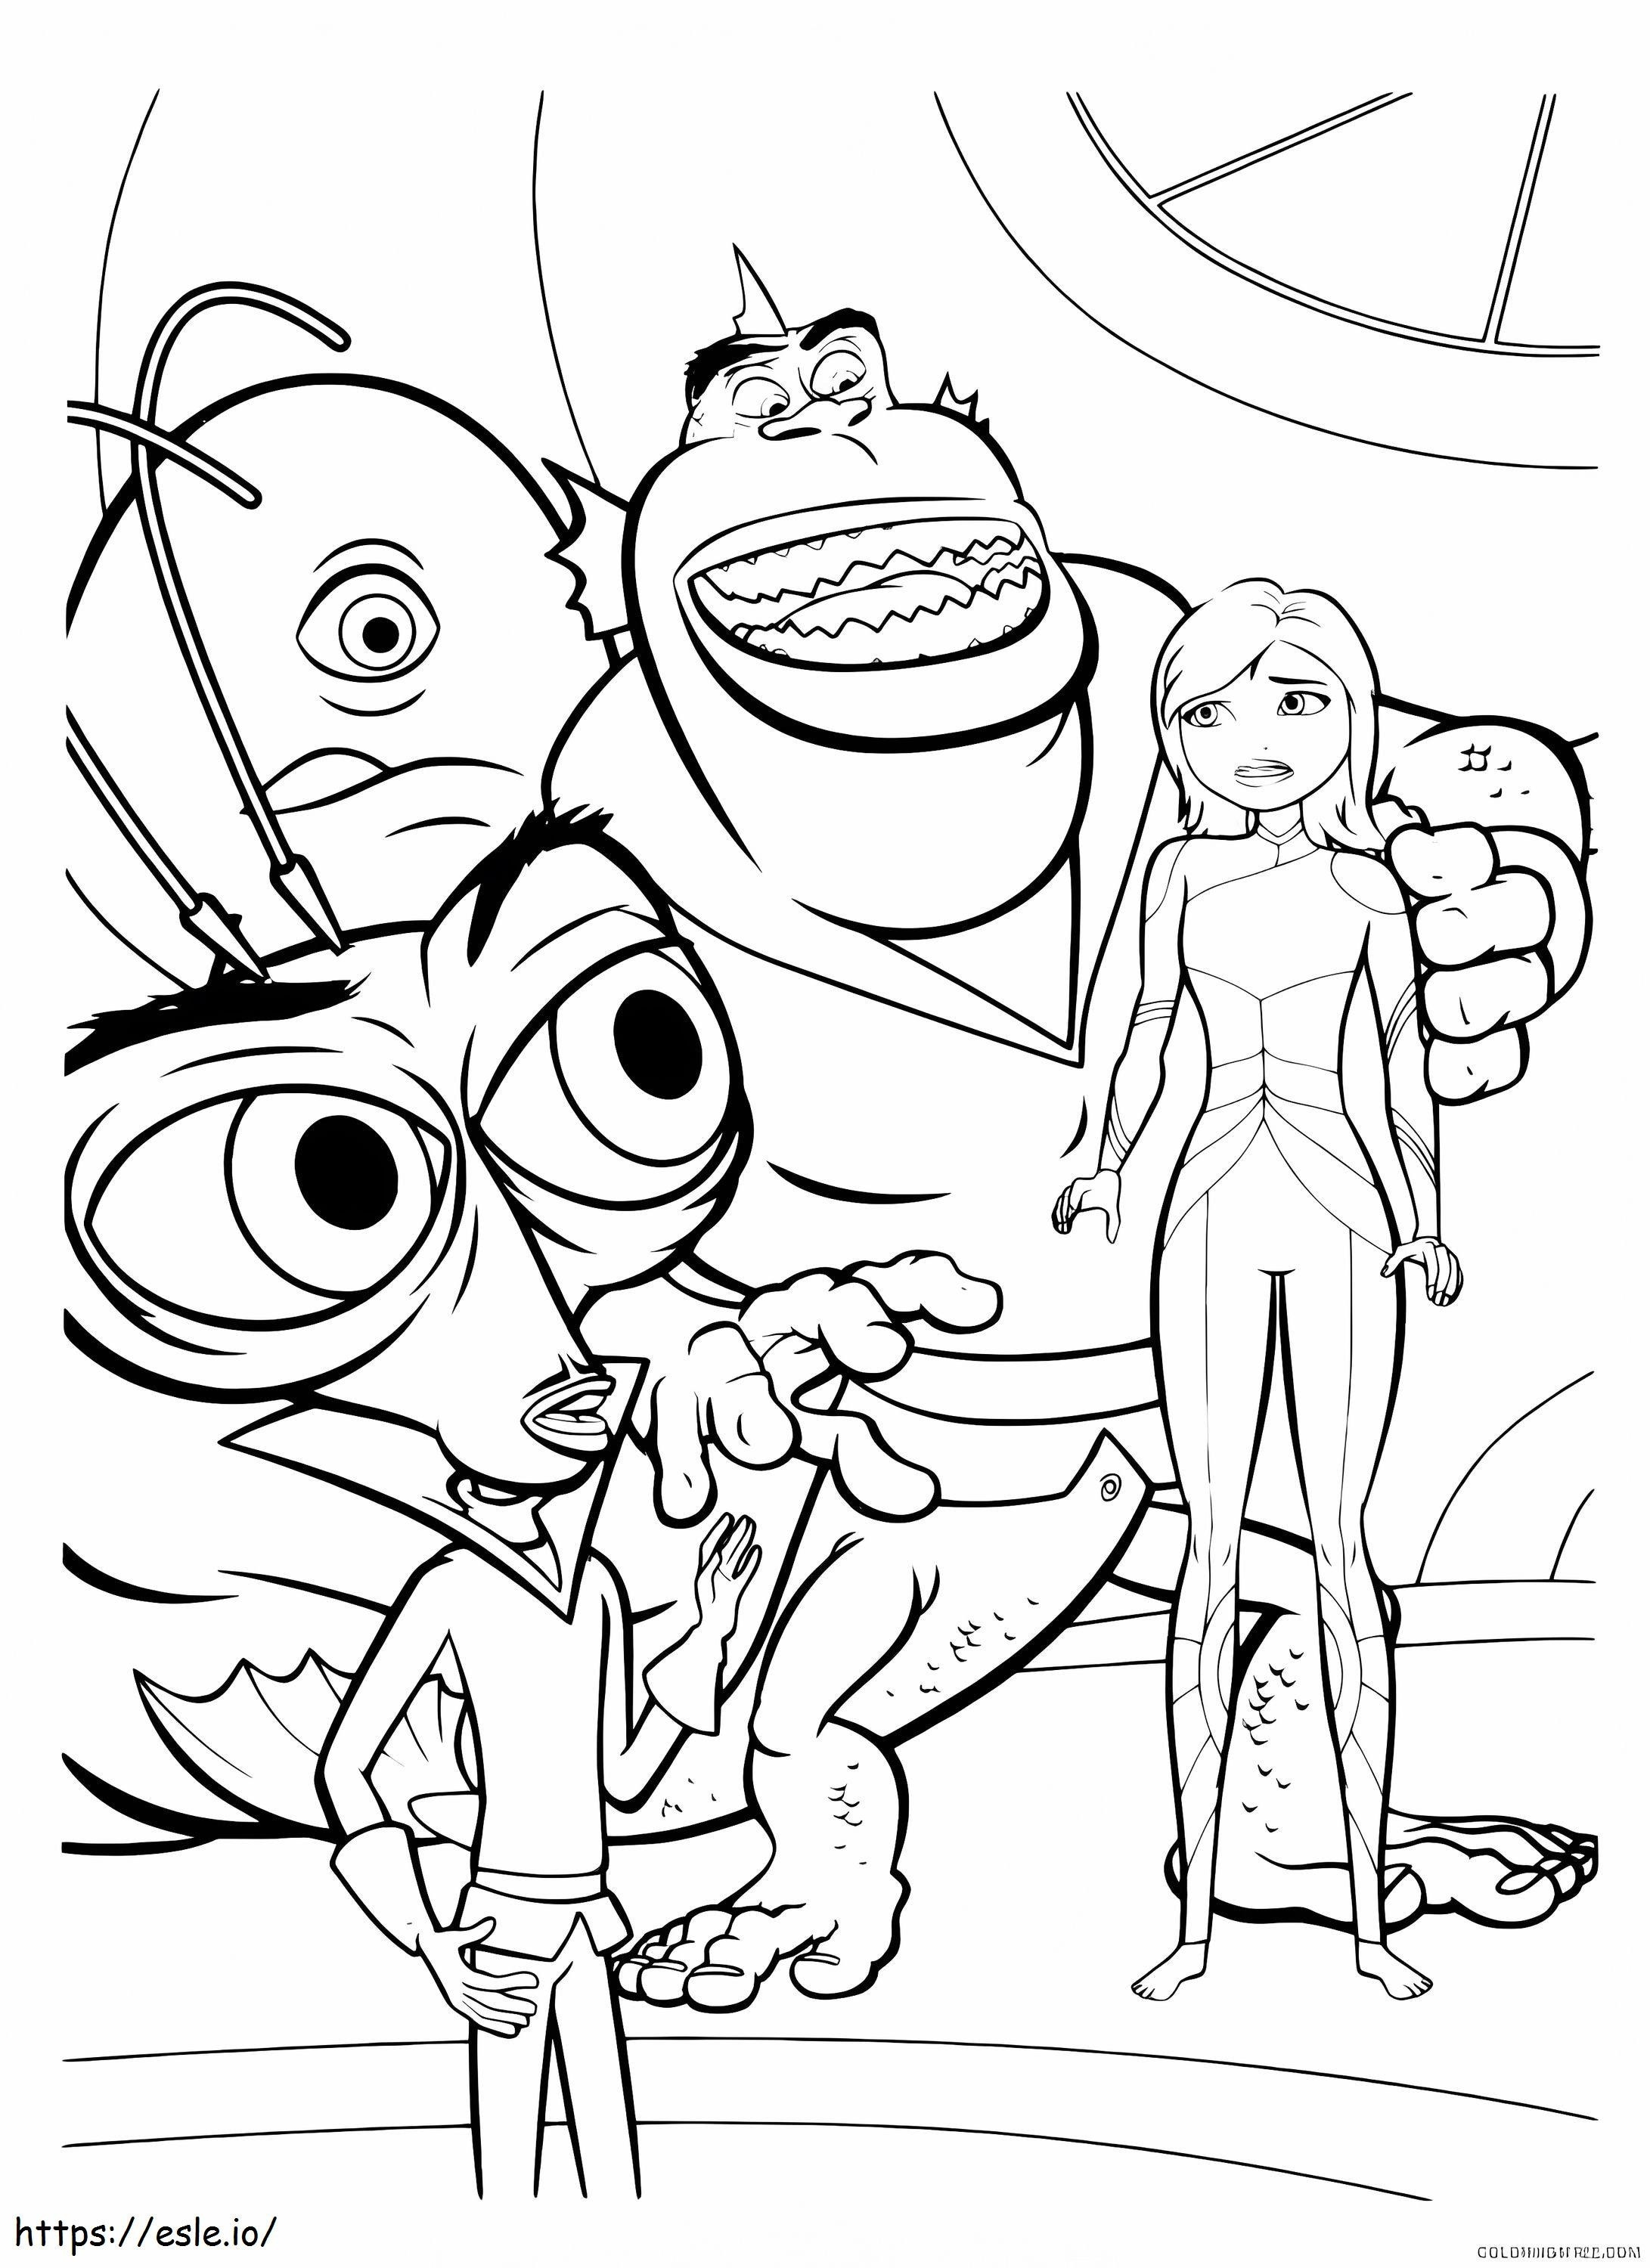 Monsters Vs Aliens To Color coloring page